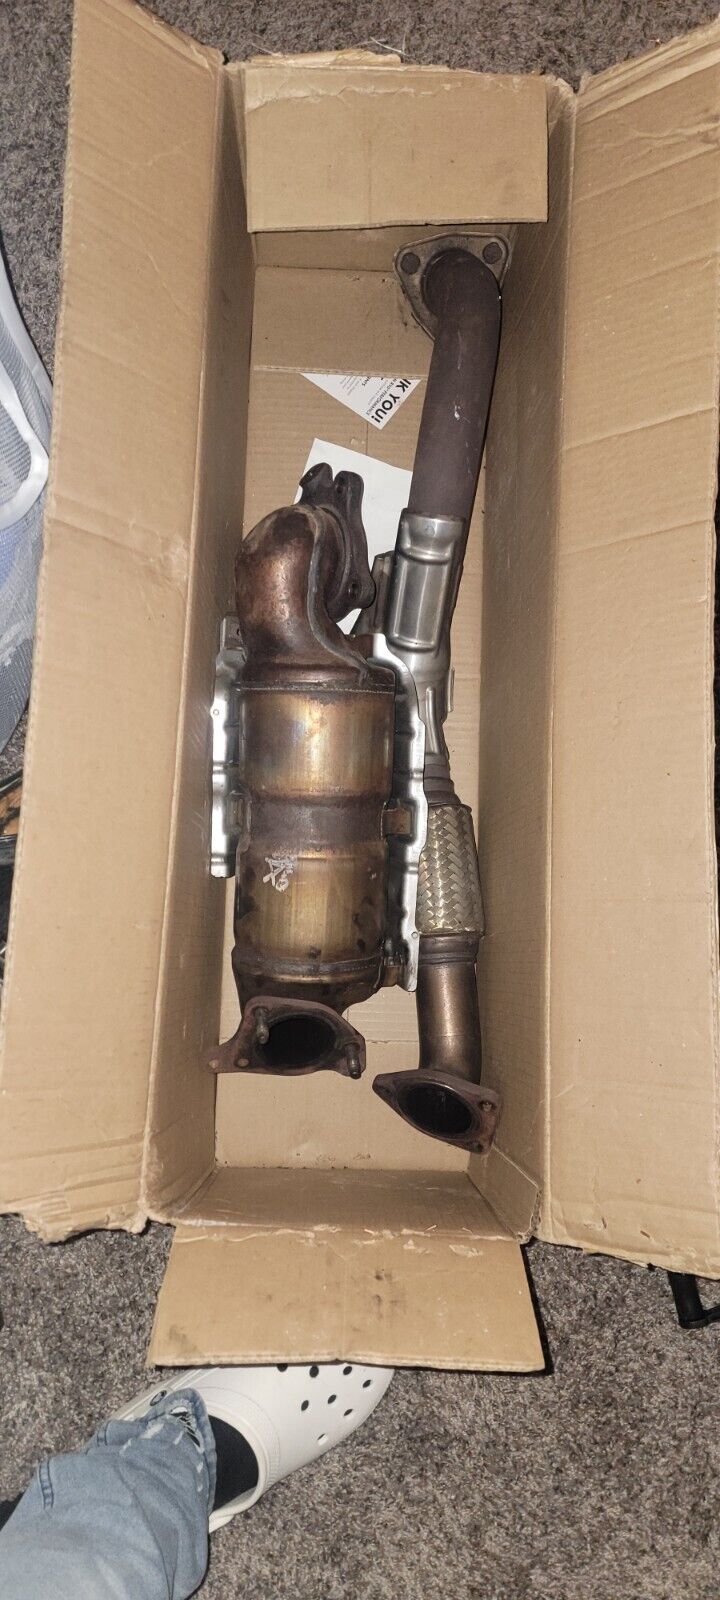 10th Gen Civic Sport Hatchback Stock Downpipe/frontpipe